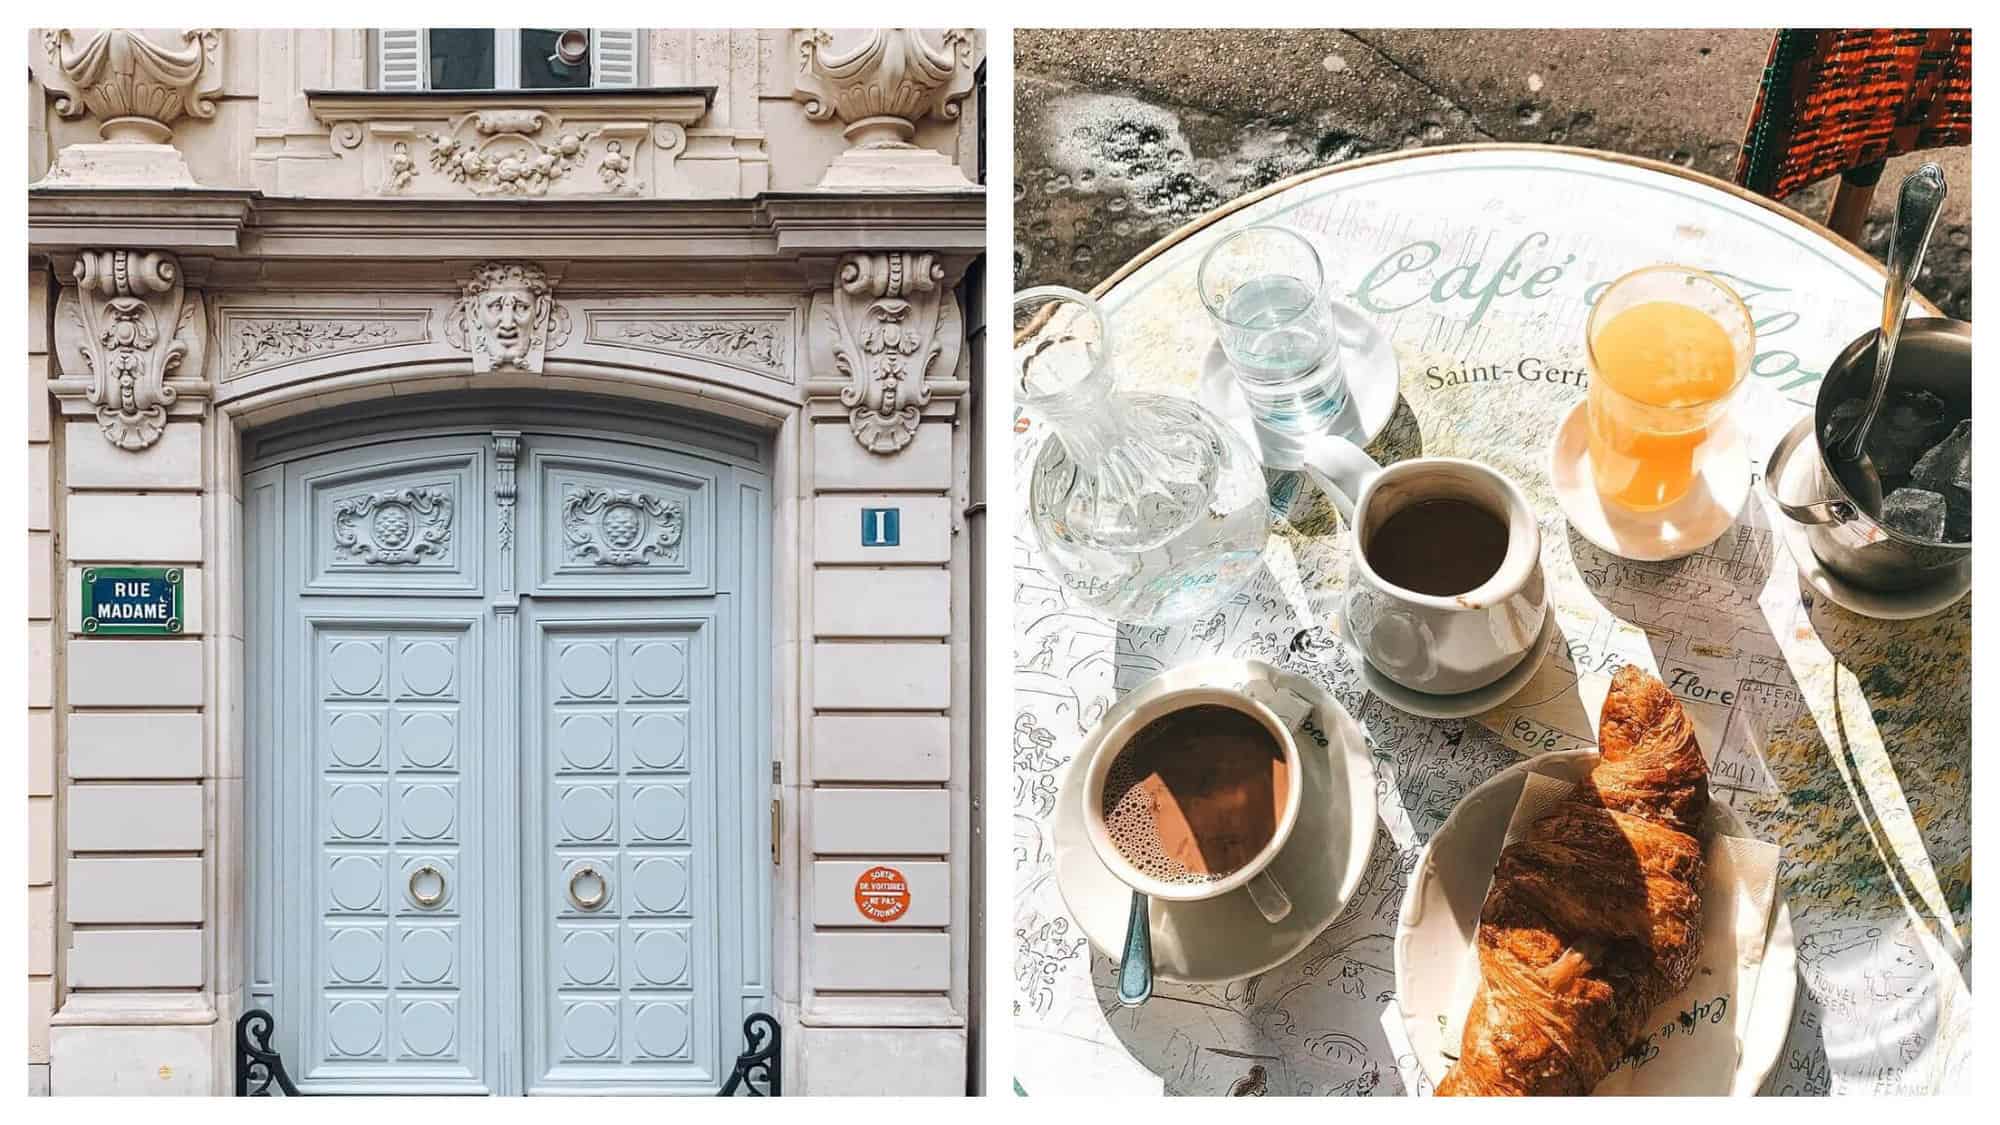 Left: a sky blue door on an old Parisain building. There are sculptural details above and surrounding the door. There is a blue street sign to the left and a blue number 1 to the right. Right: A table that has the words "Café de Flore" on it with a cup of hot chocolate and a larger carafe of hot chocolate. There is also a glass bottle of water with a glass and another glass of orange juice and a croissant.  